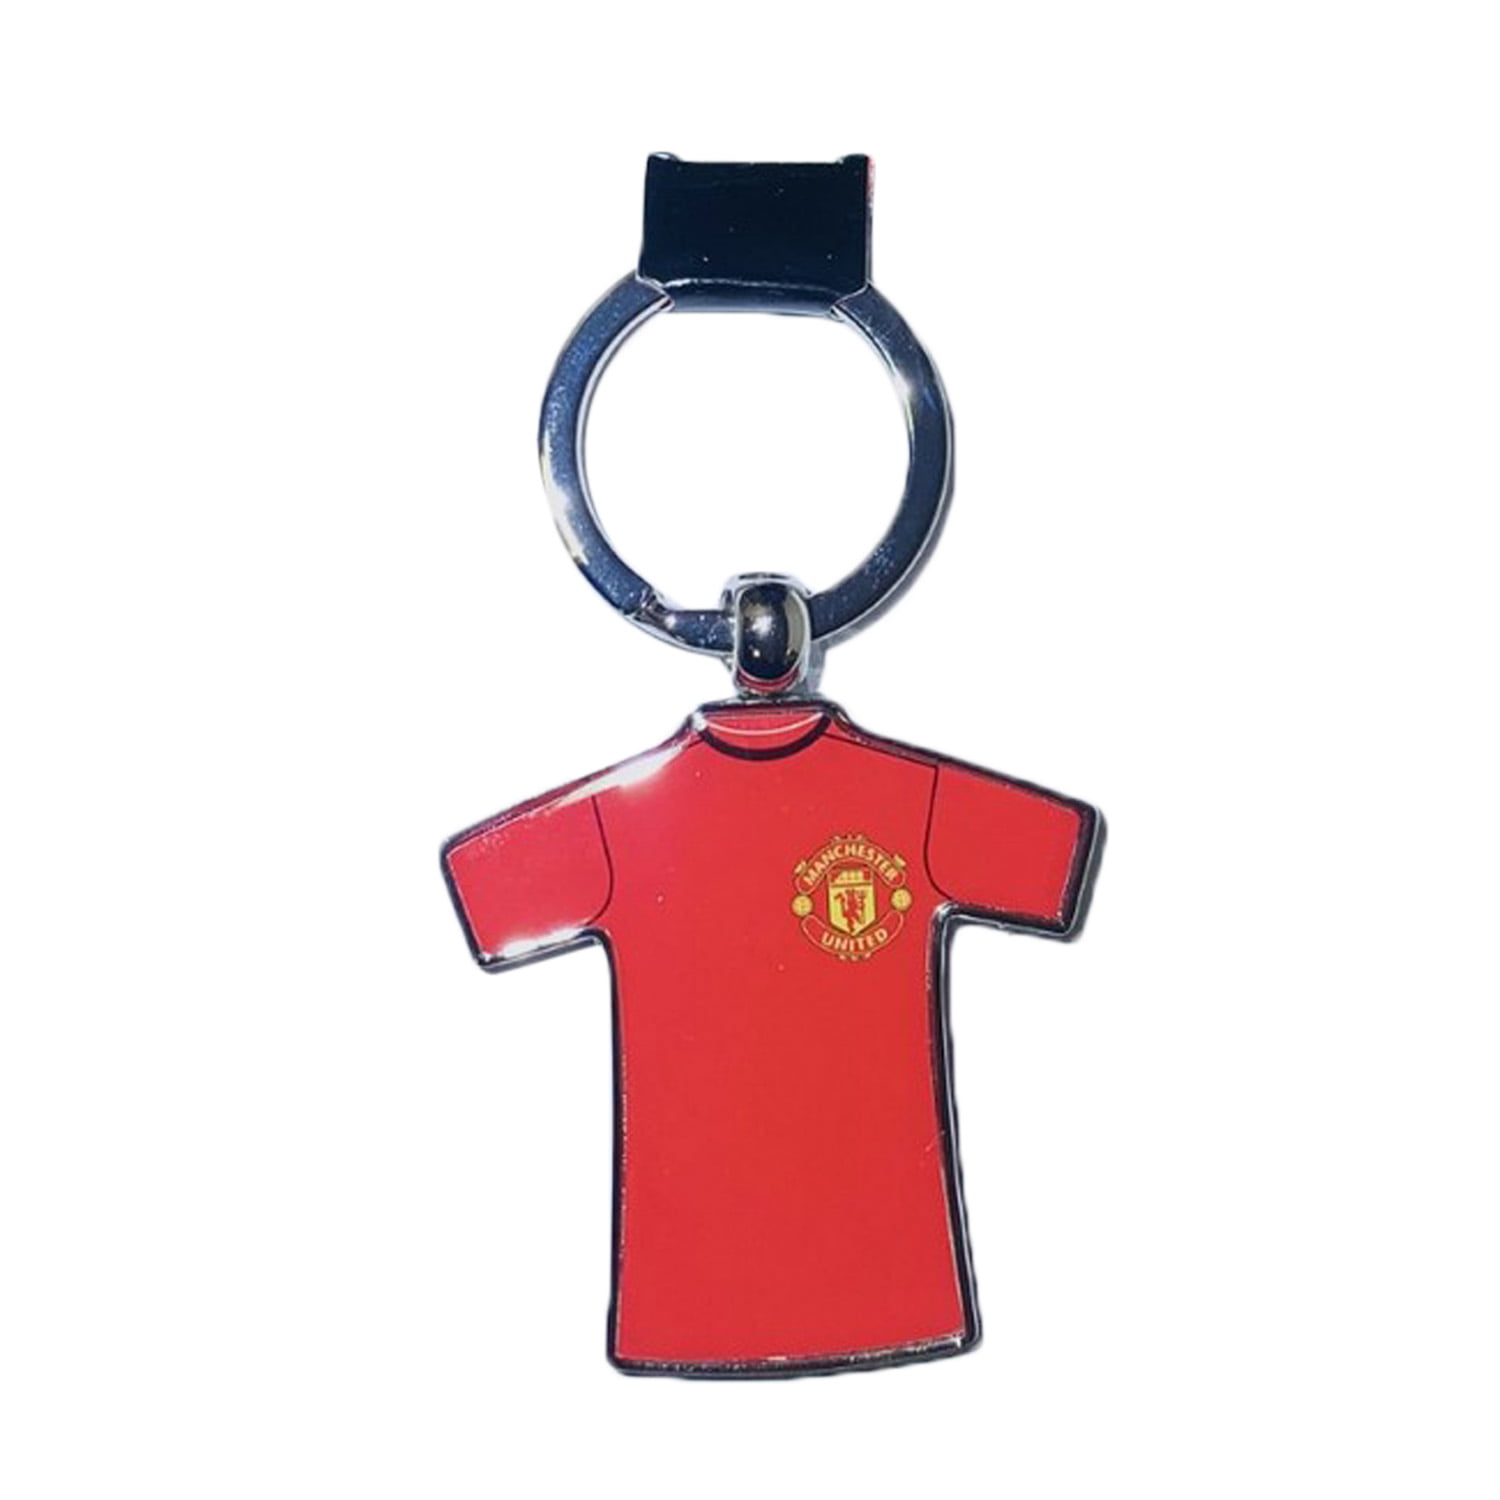 keychain KEY797 NEW Manchester United FC Official Metal Spinning Crest Keyring 